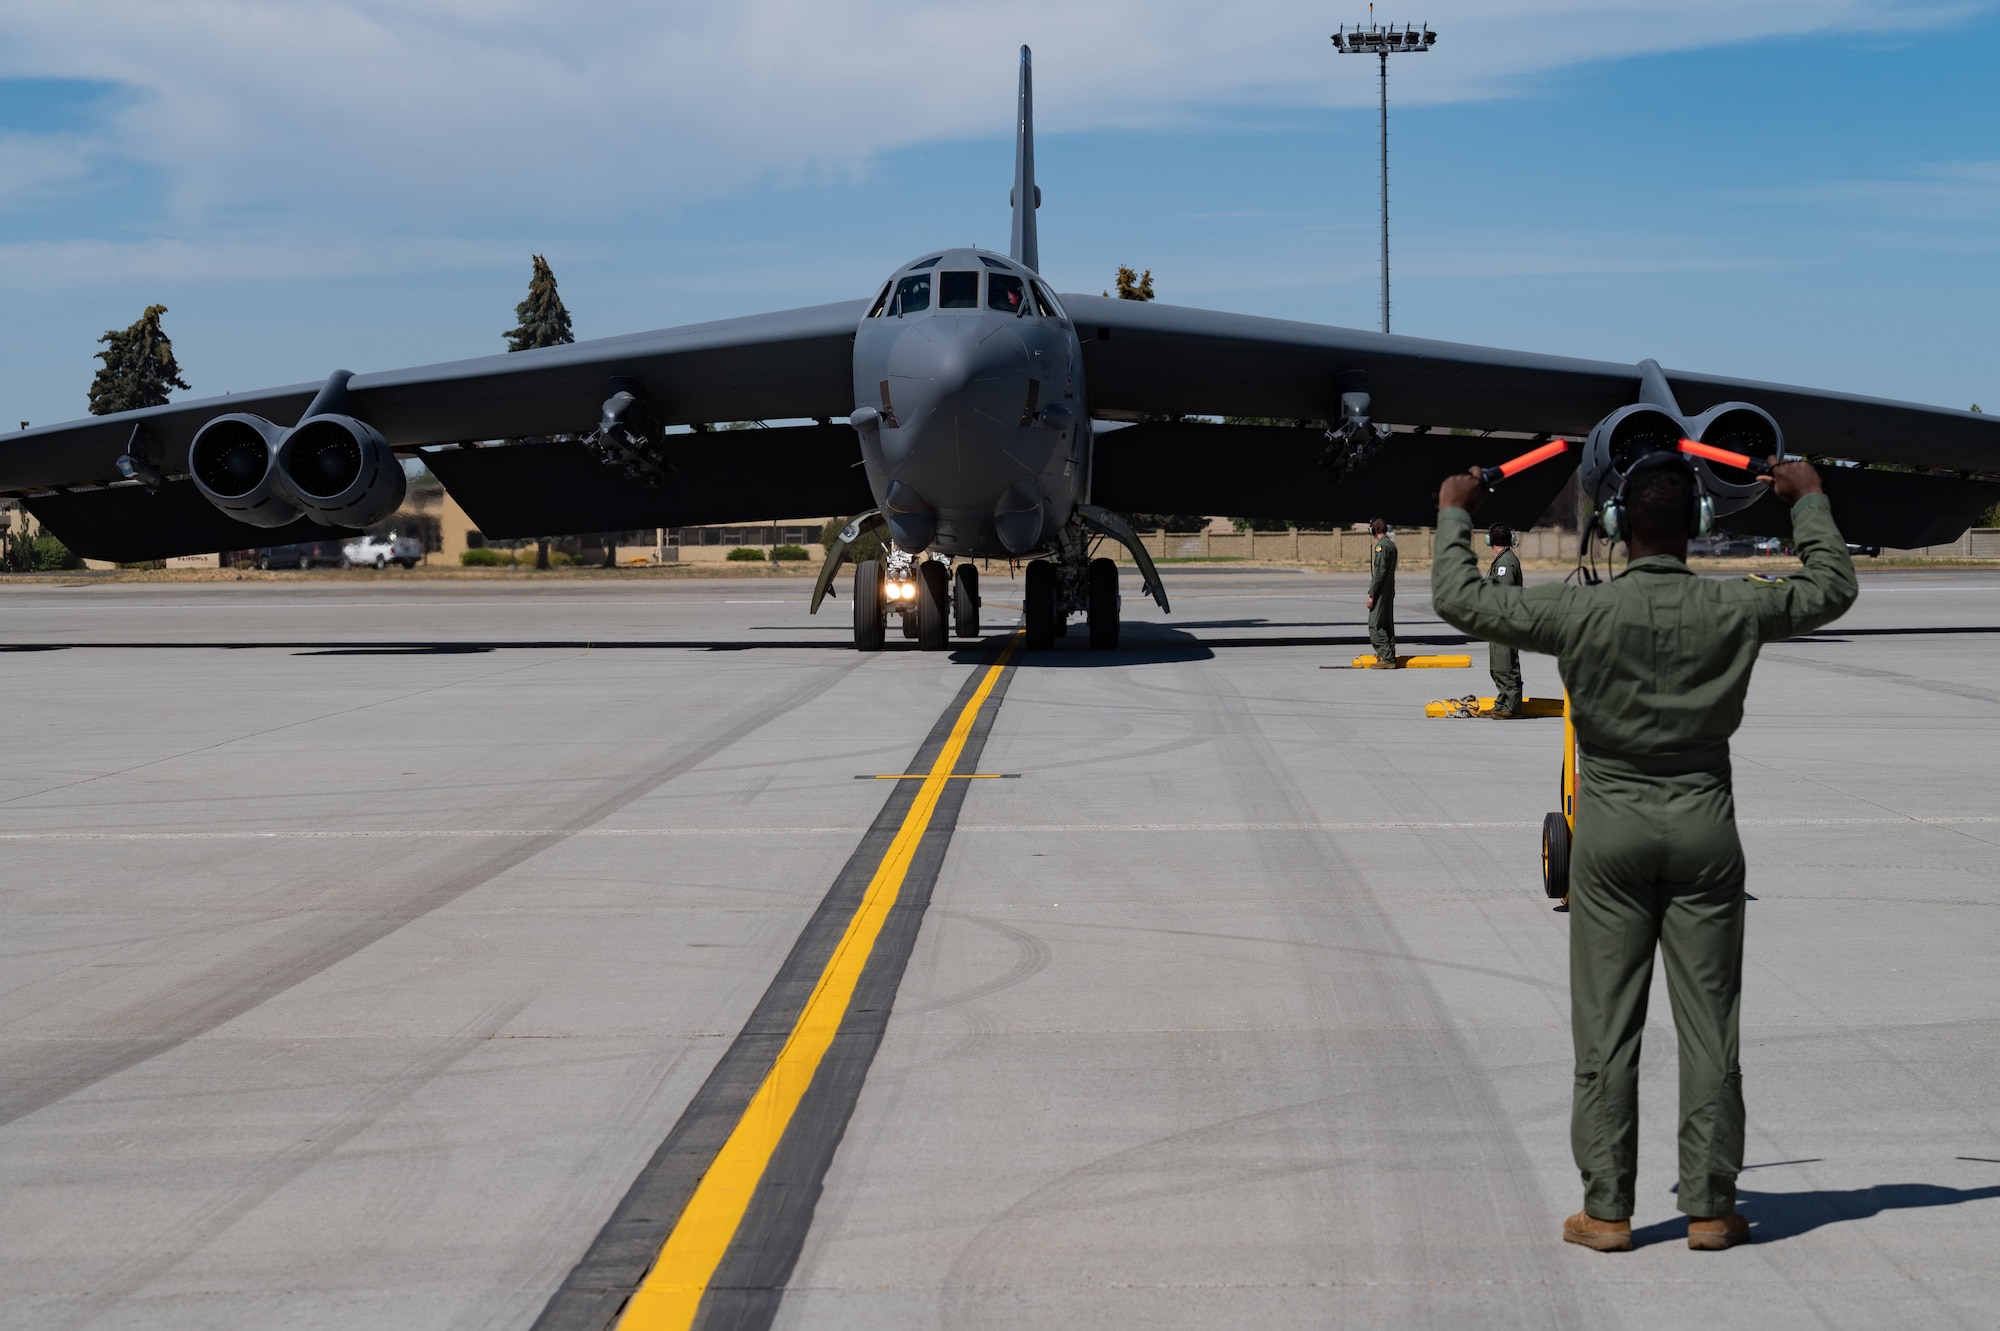 Master Sgt. Anthony Williams, 2nd Aircraft Maintenance Squadron production superintendent, marshals a B-52H Stratofortress on the flight line at Fairchild Air Force Base, Washington during an Agile Combat Employment exercise Aug. 16, 2022. The B-52 is a long-range, nuclear and conventional heavy bomber that can perform a variety of missions. (U.S. Air Force photo by Senior Airman Chase Sullivan)